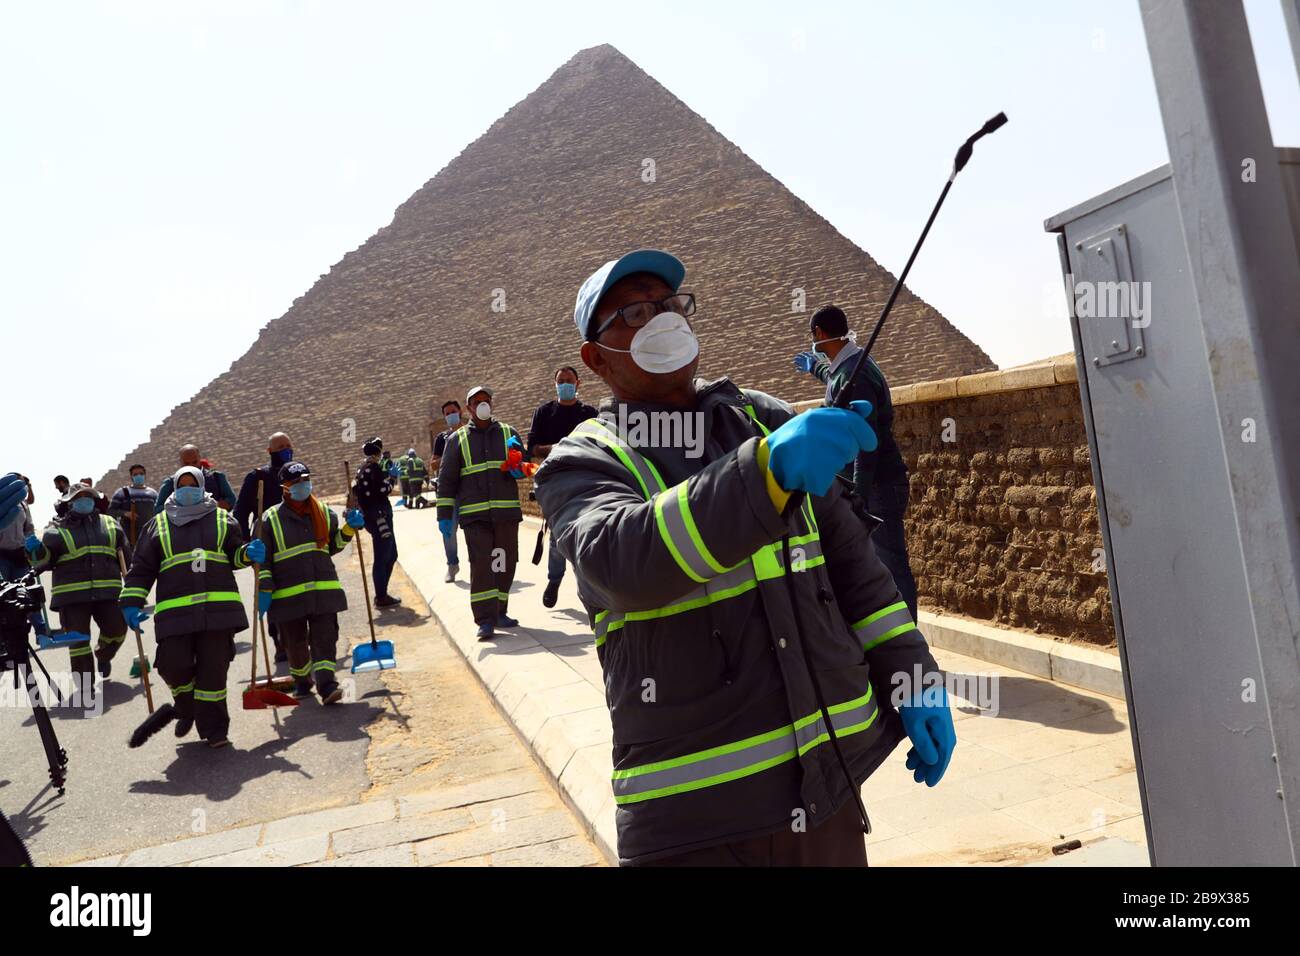 (200325) -- GIZA, March 25, 2020 (Xinhua) -- A staff member disinfects near the Pyramids in Giza, Egypt, March 25, 2020. Egypt announced on Tuesday that one COVID-19 case died and 36 new cases were detected, bringing the total number of cases in the country to 402. (Xinhua/Ahmed Gomaa) Stock Photo